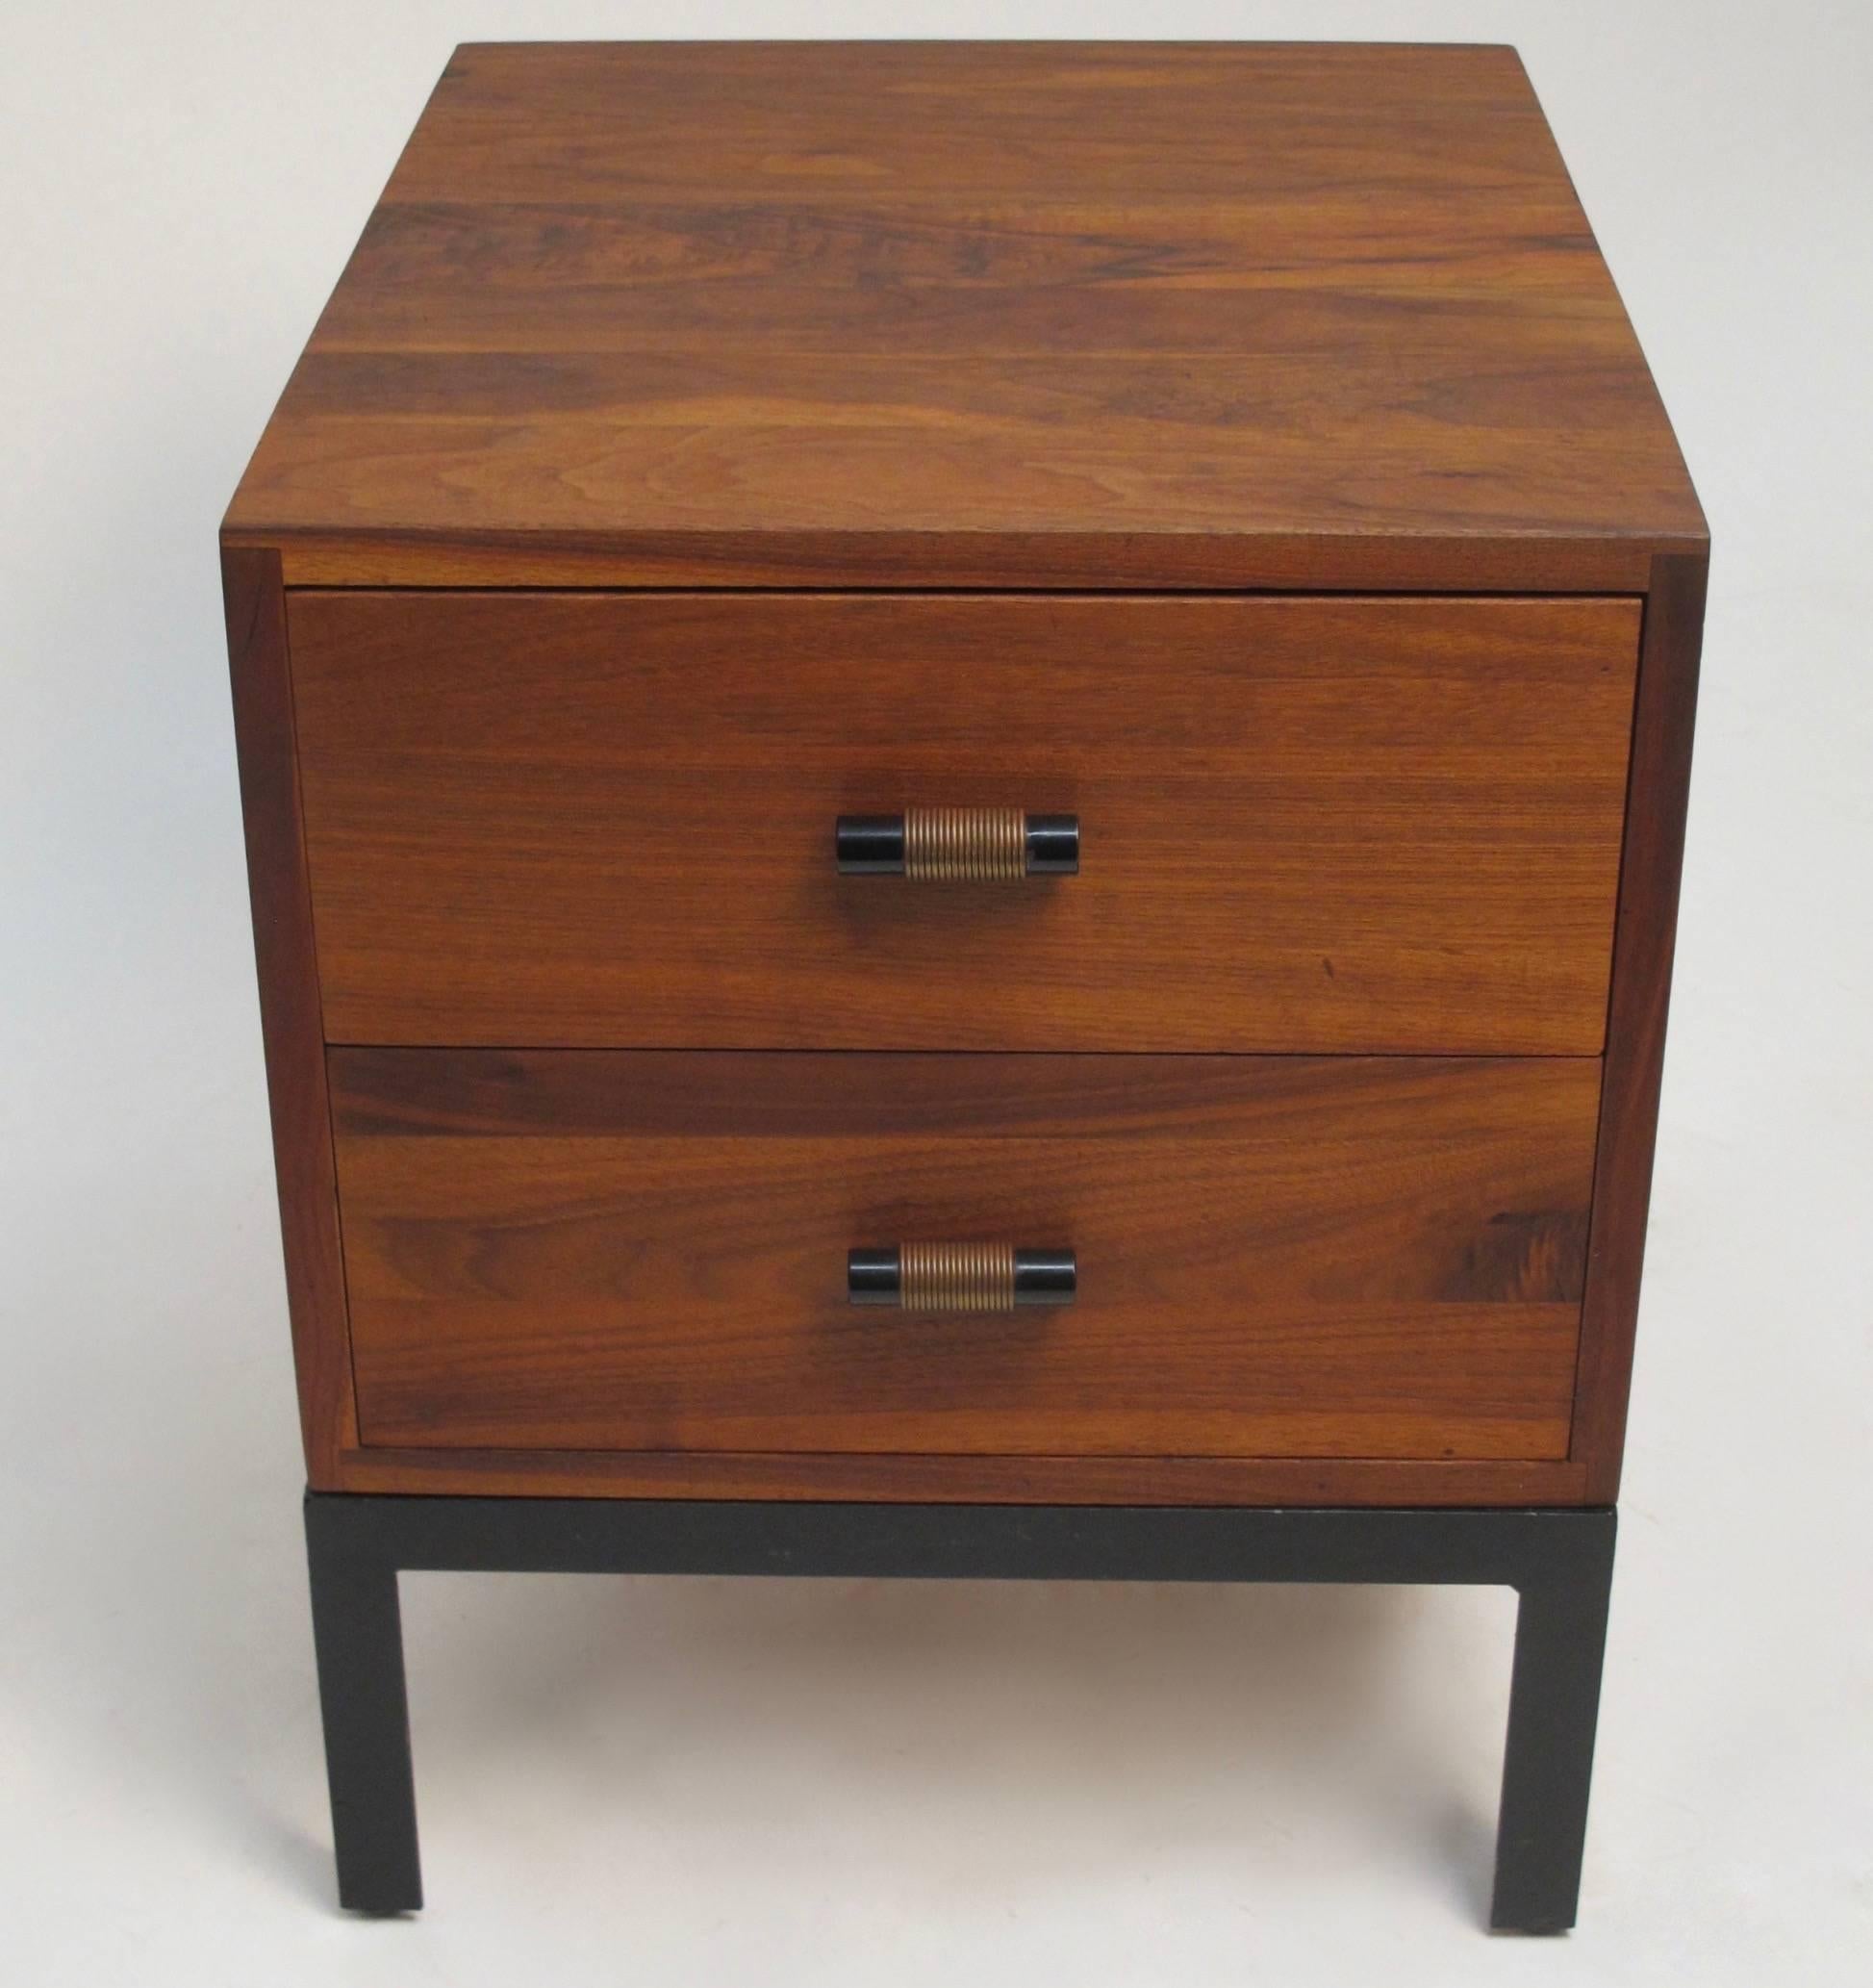 A solid walnut two-drawer chest or side table with wrapped steel pulls sitting on an iron base.  circa 1960s.